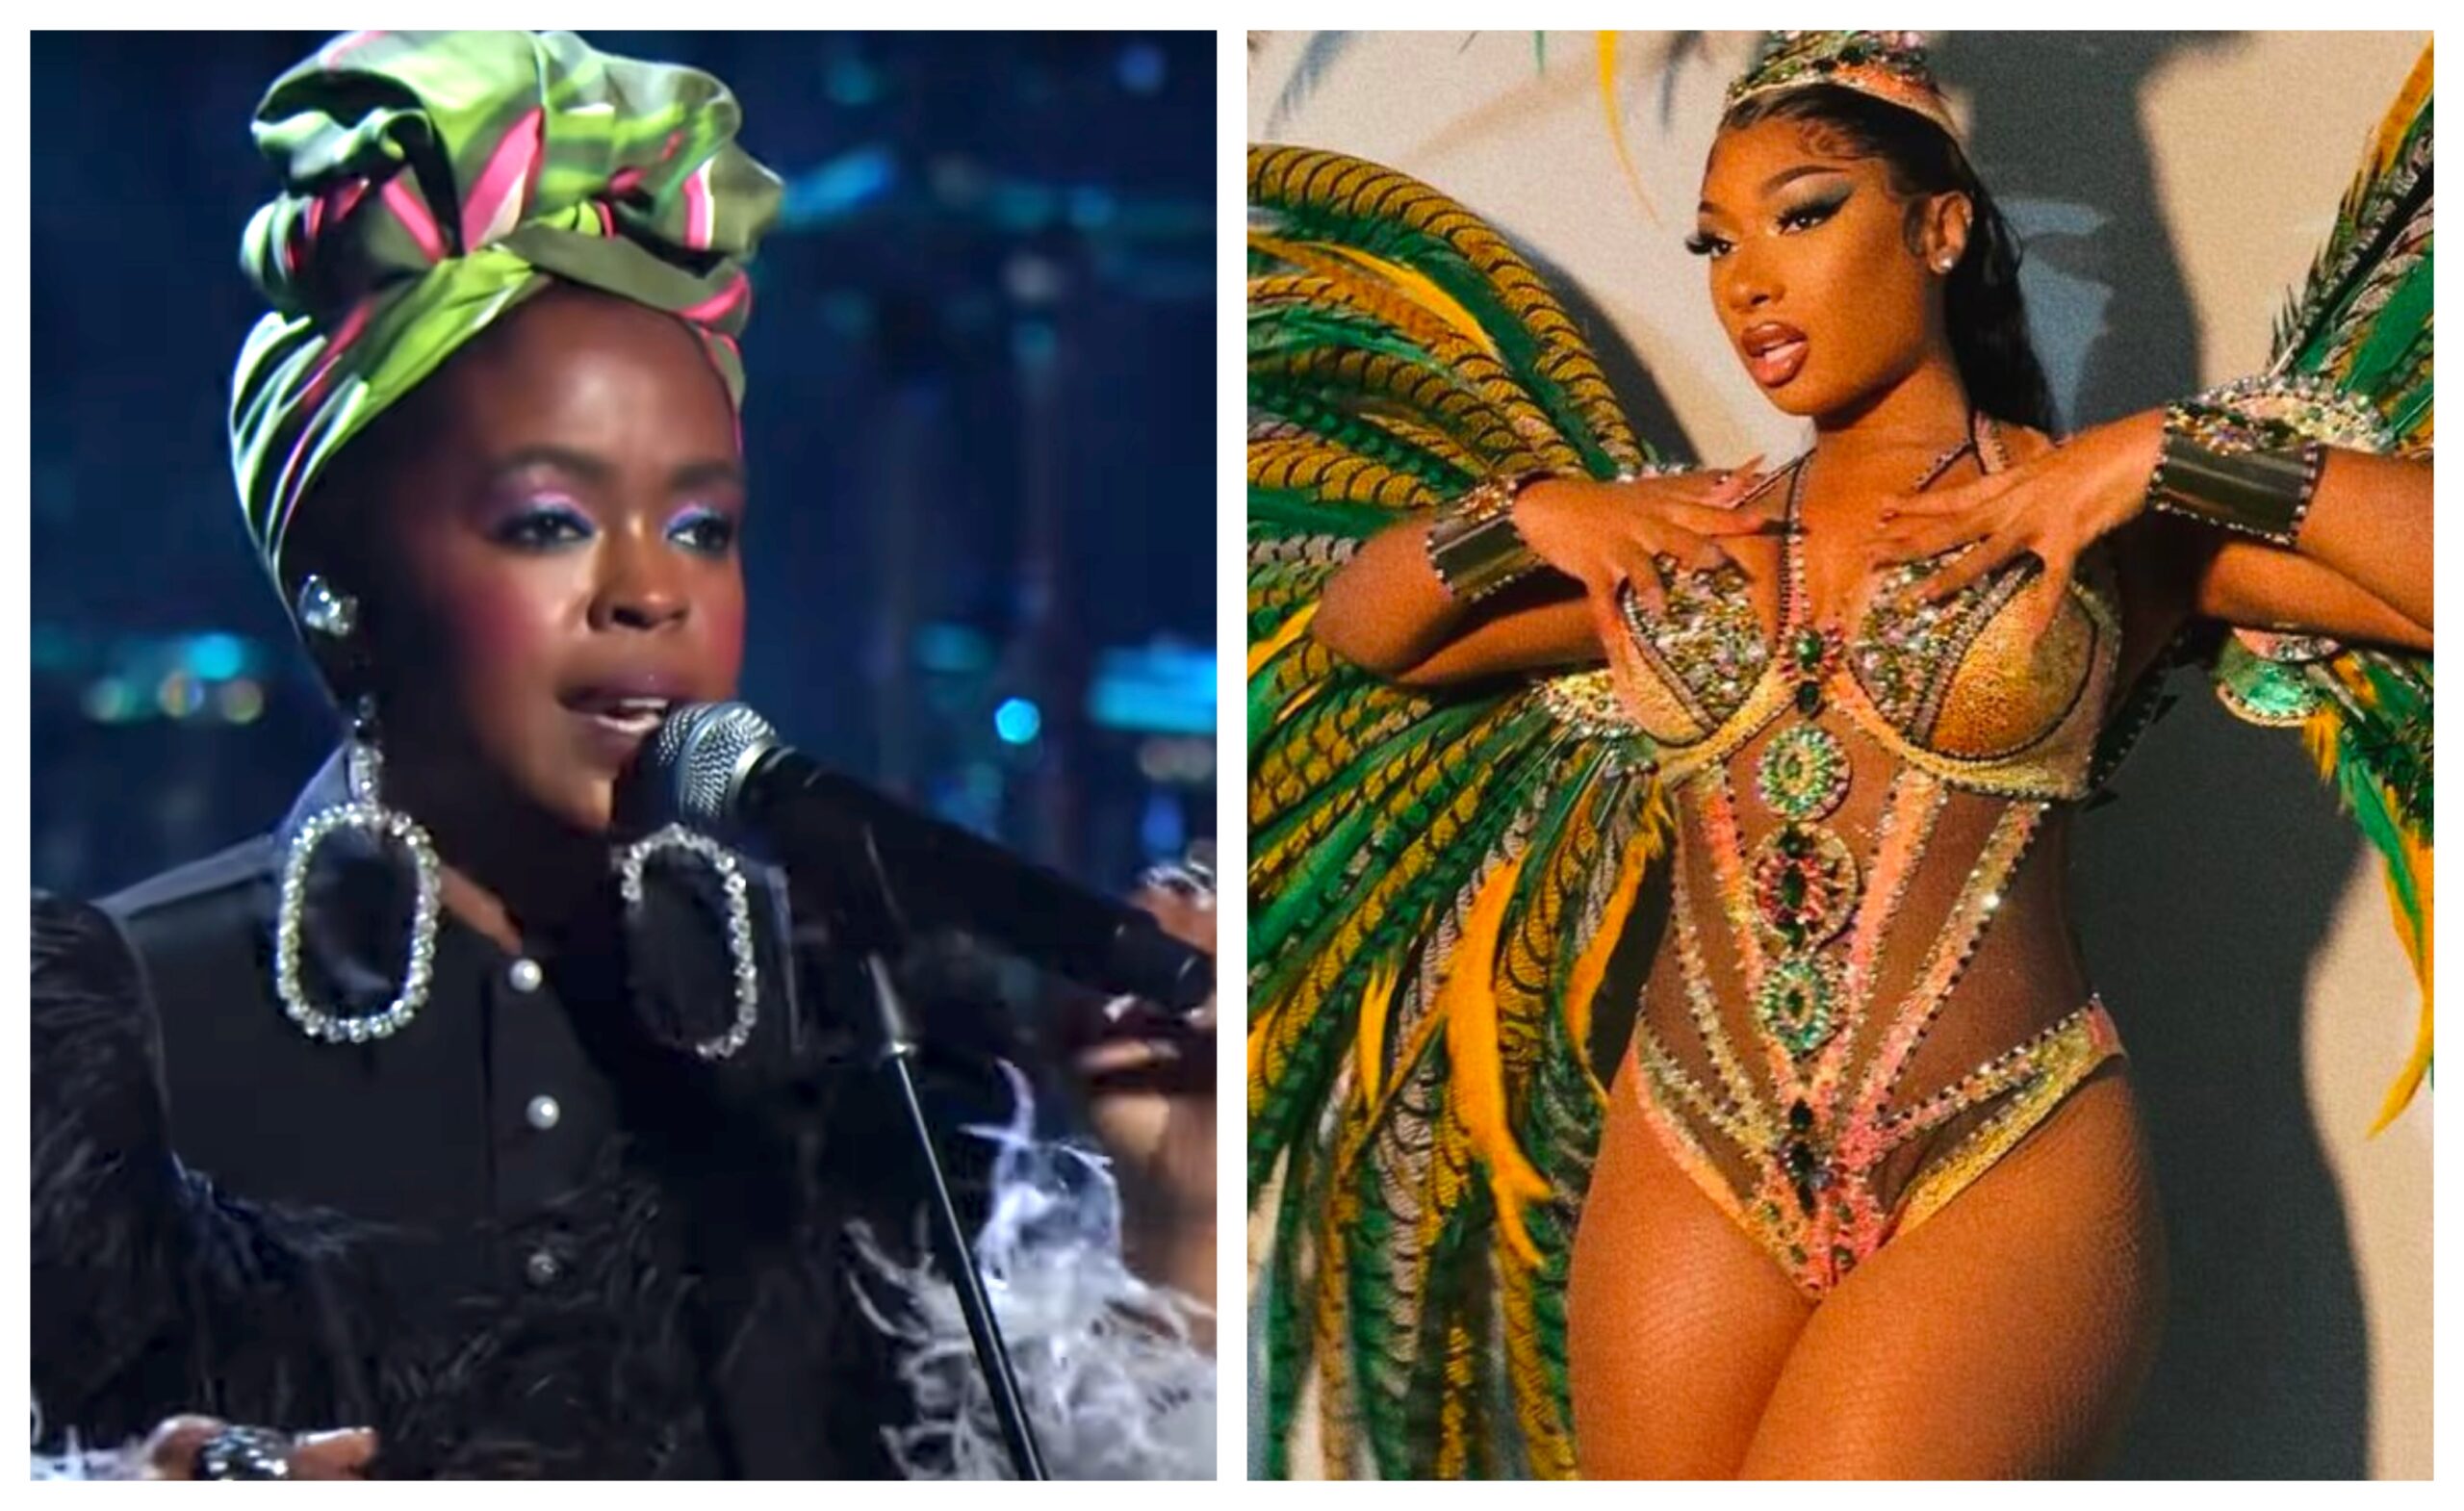 ESSENCE Festival 2023: Lauryn Hill & Megan Thee Stallion to Headline / Monica, Coco Jones, Wizkid, & So So Def Tribute Add to Stacked Lineup